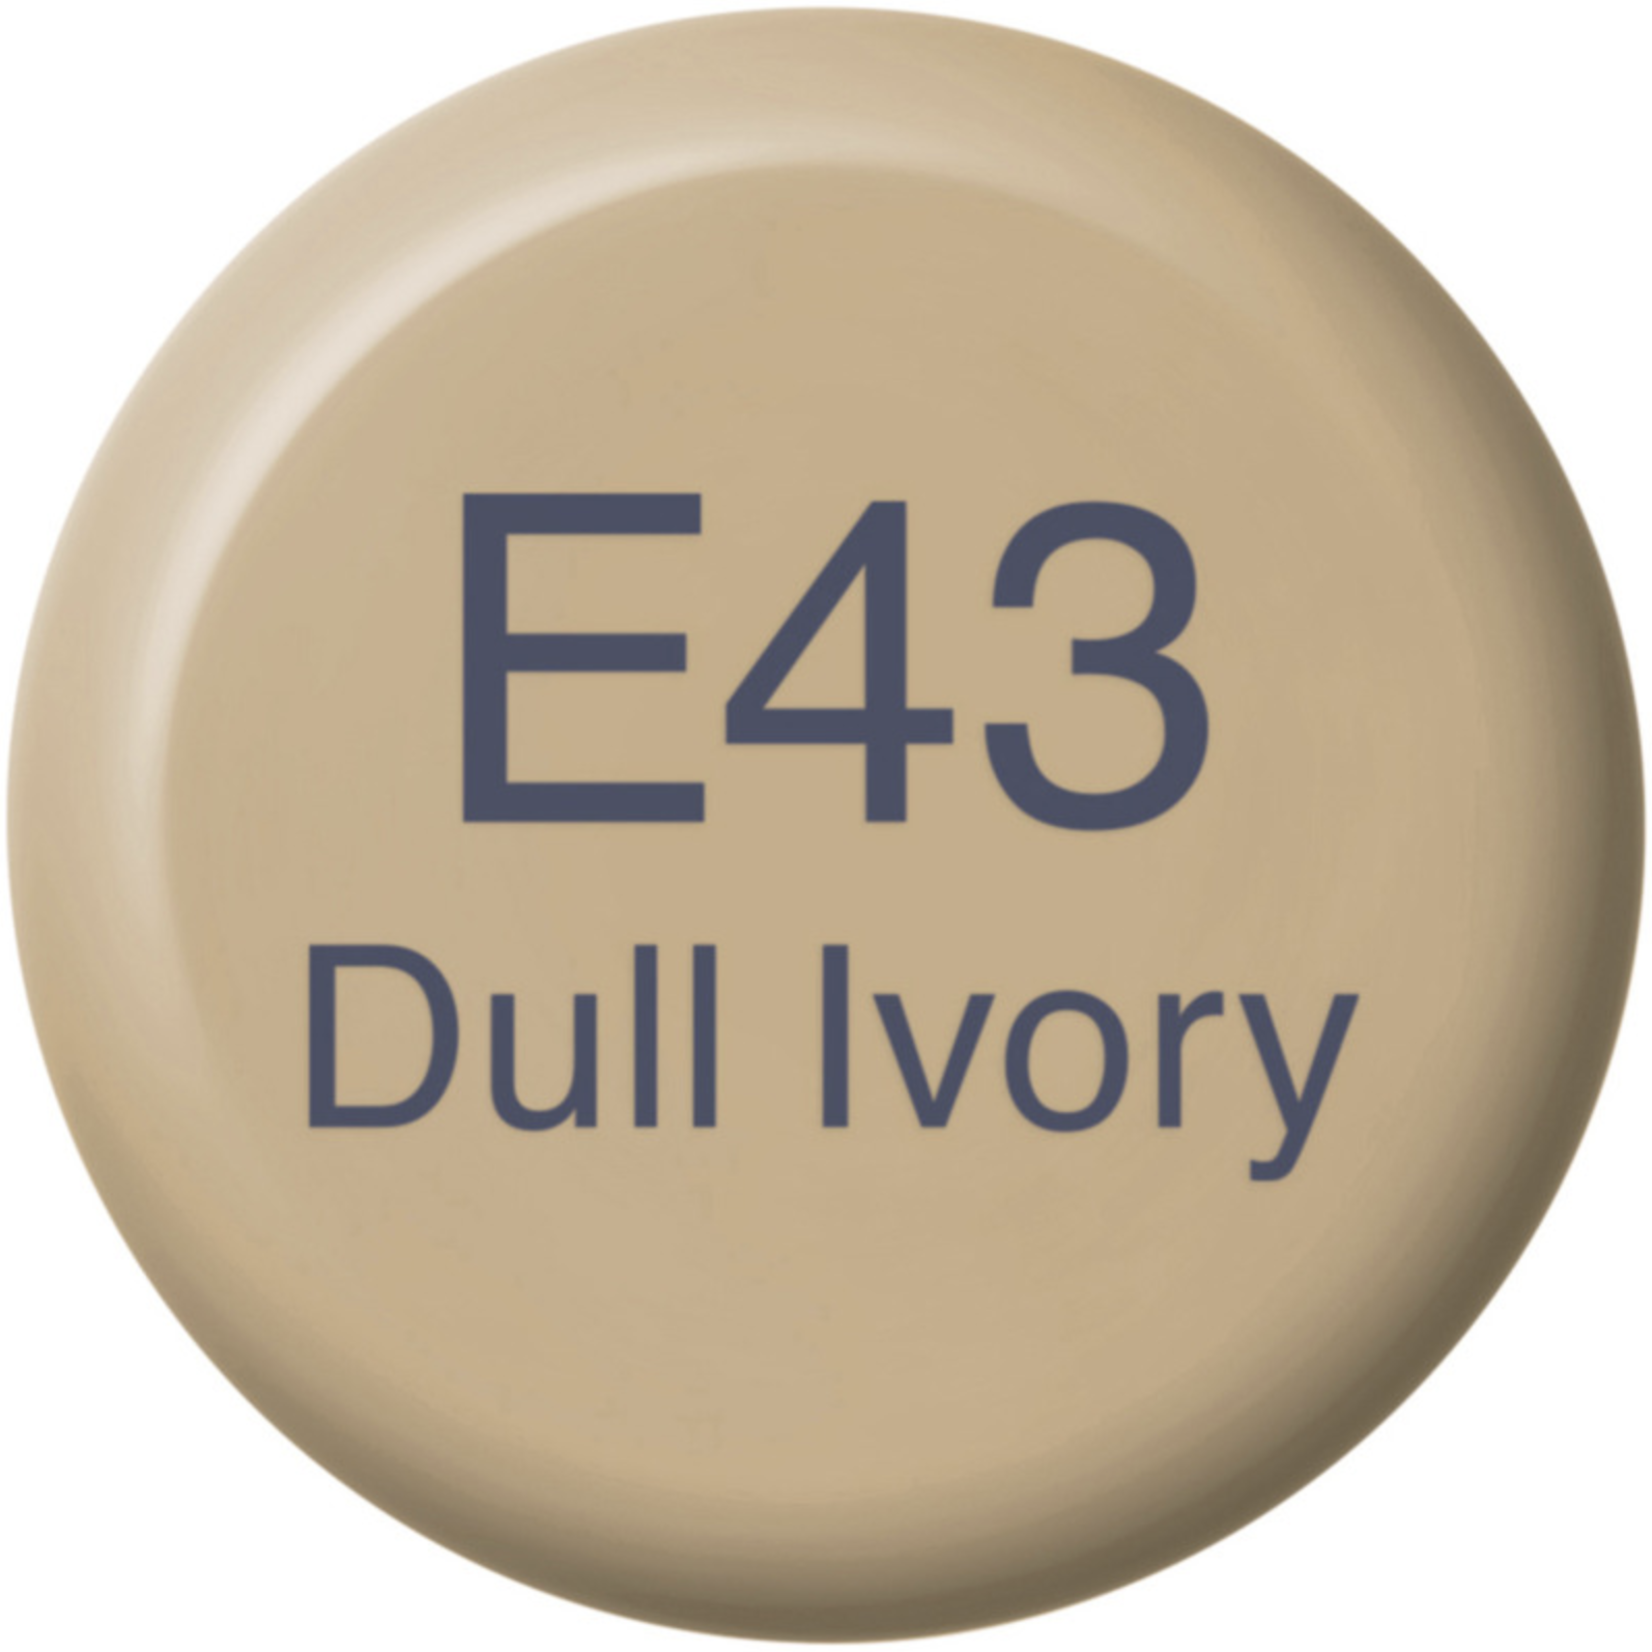 COPIC COPIC INK REFILL 12ML E43 DULL IVORY